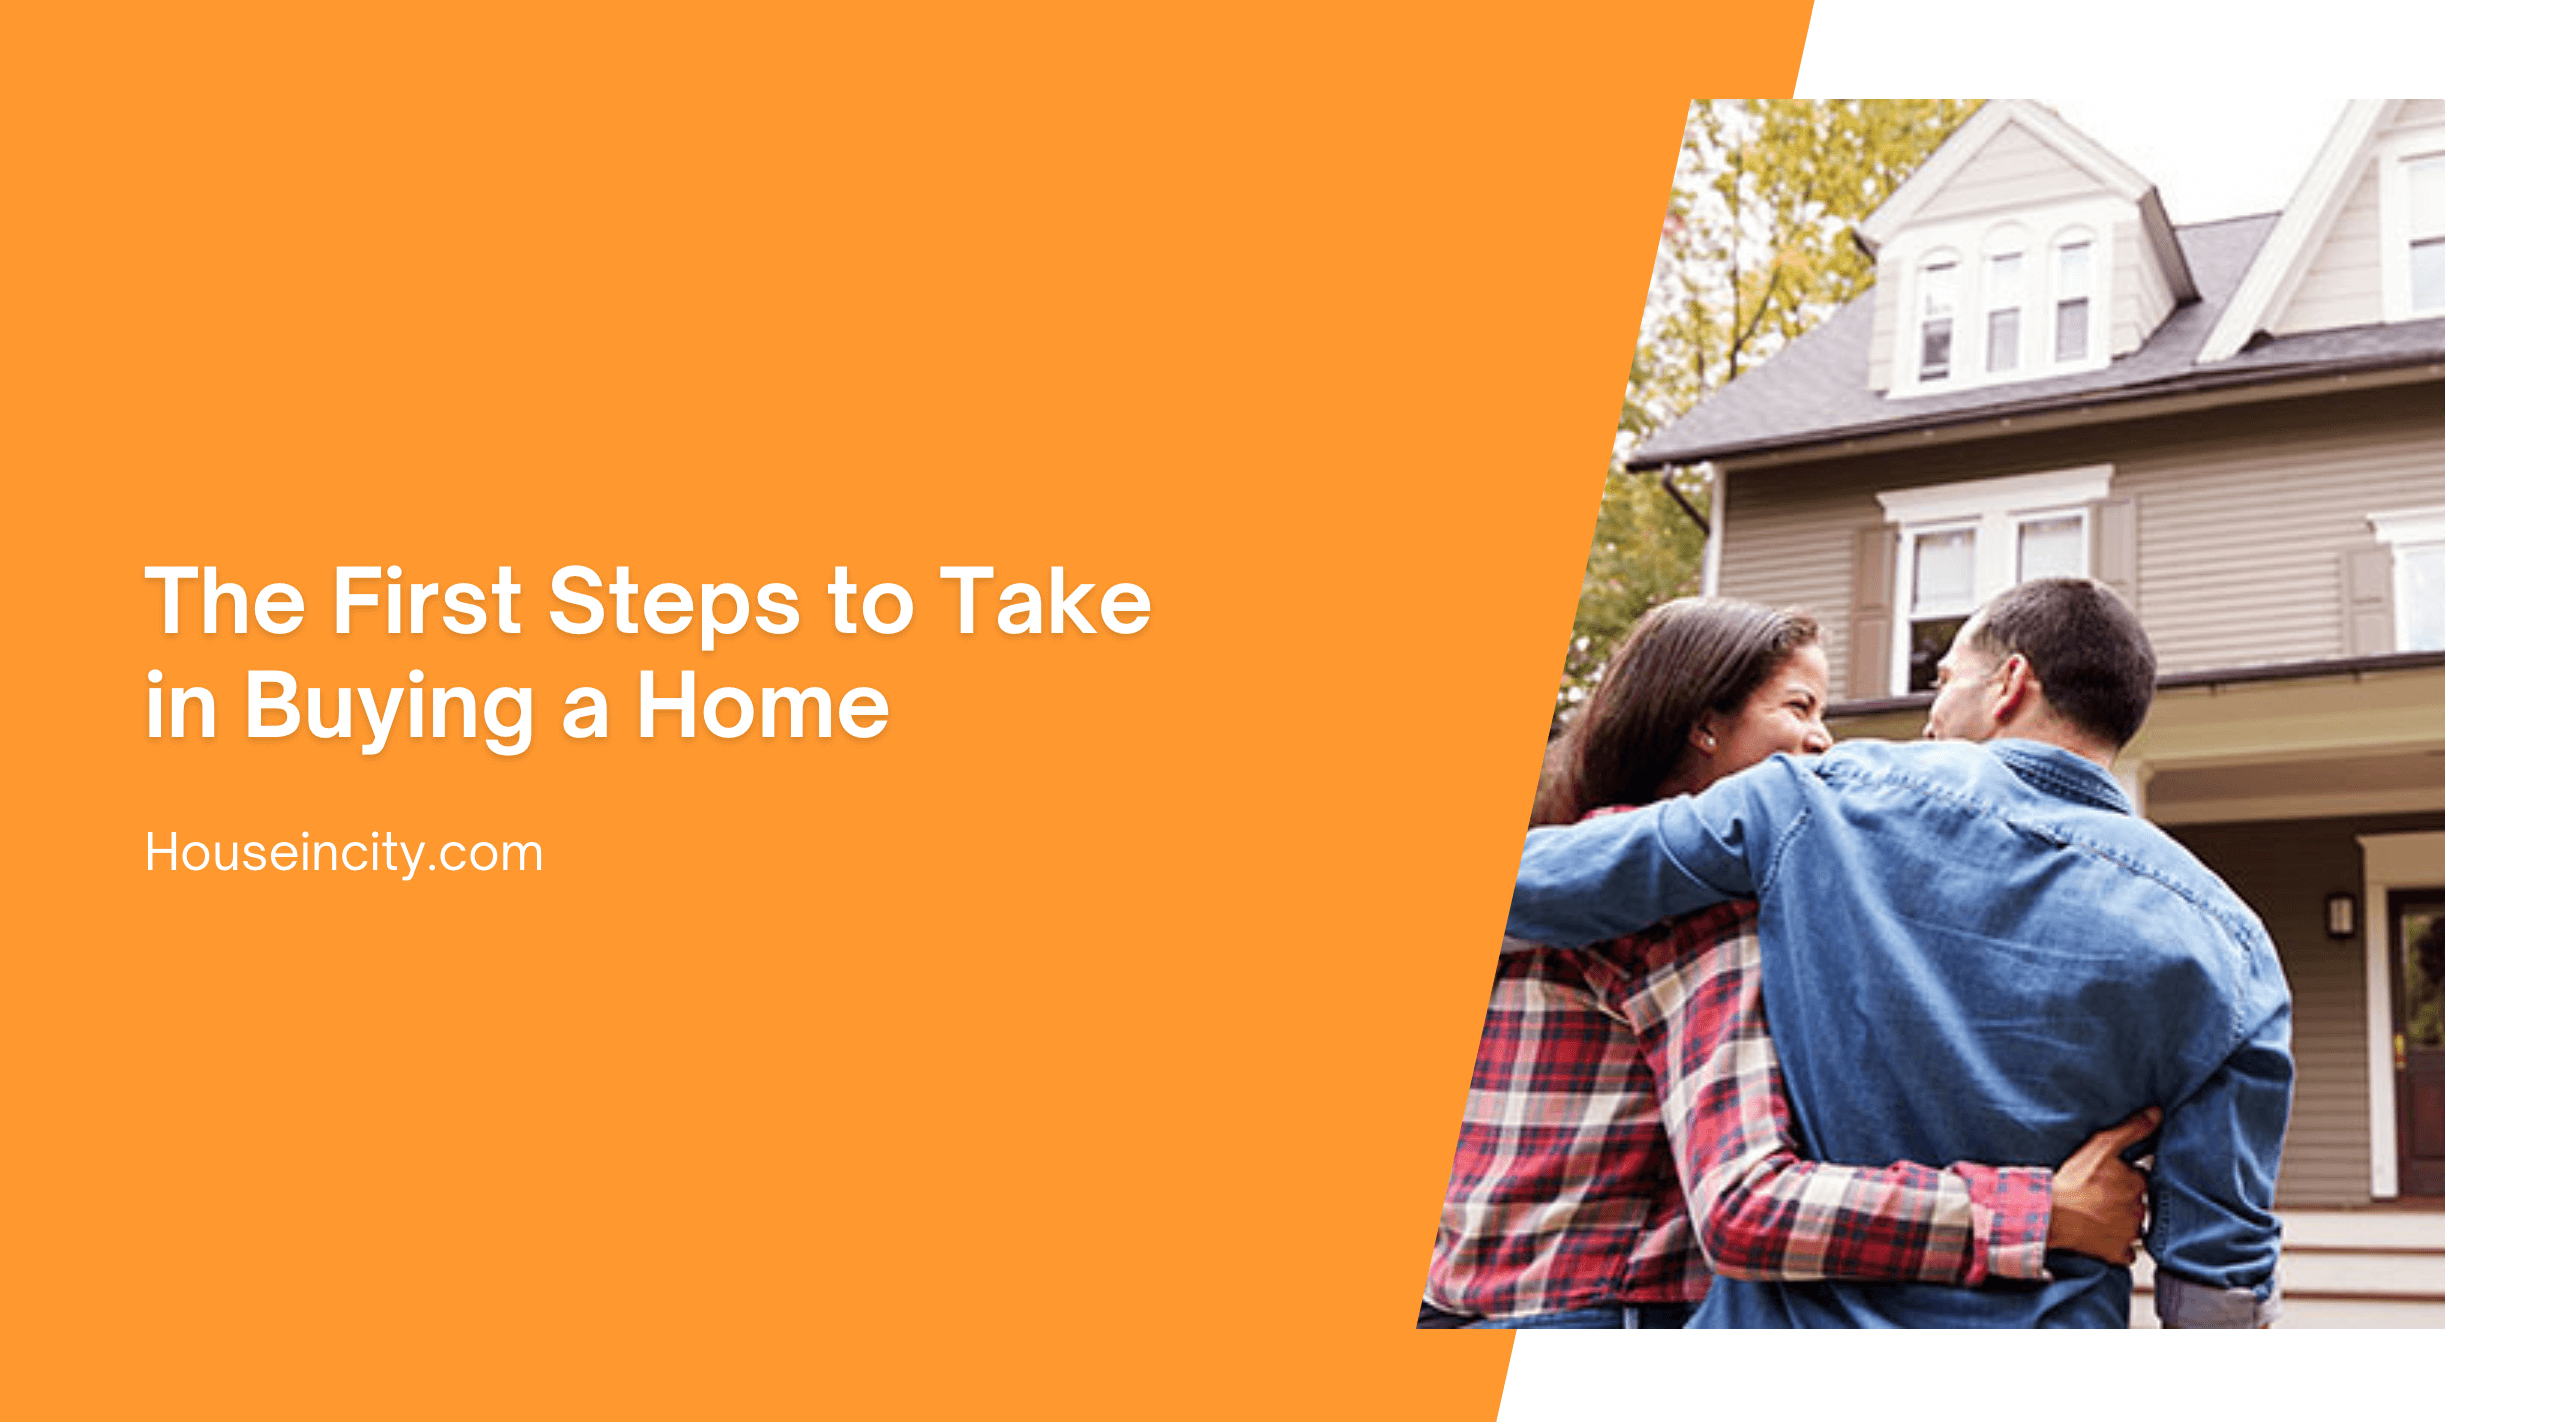 The First Steps to Take in Buying a Home